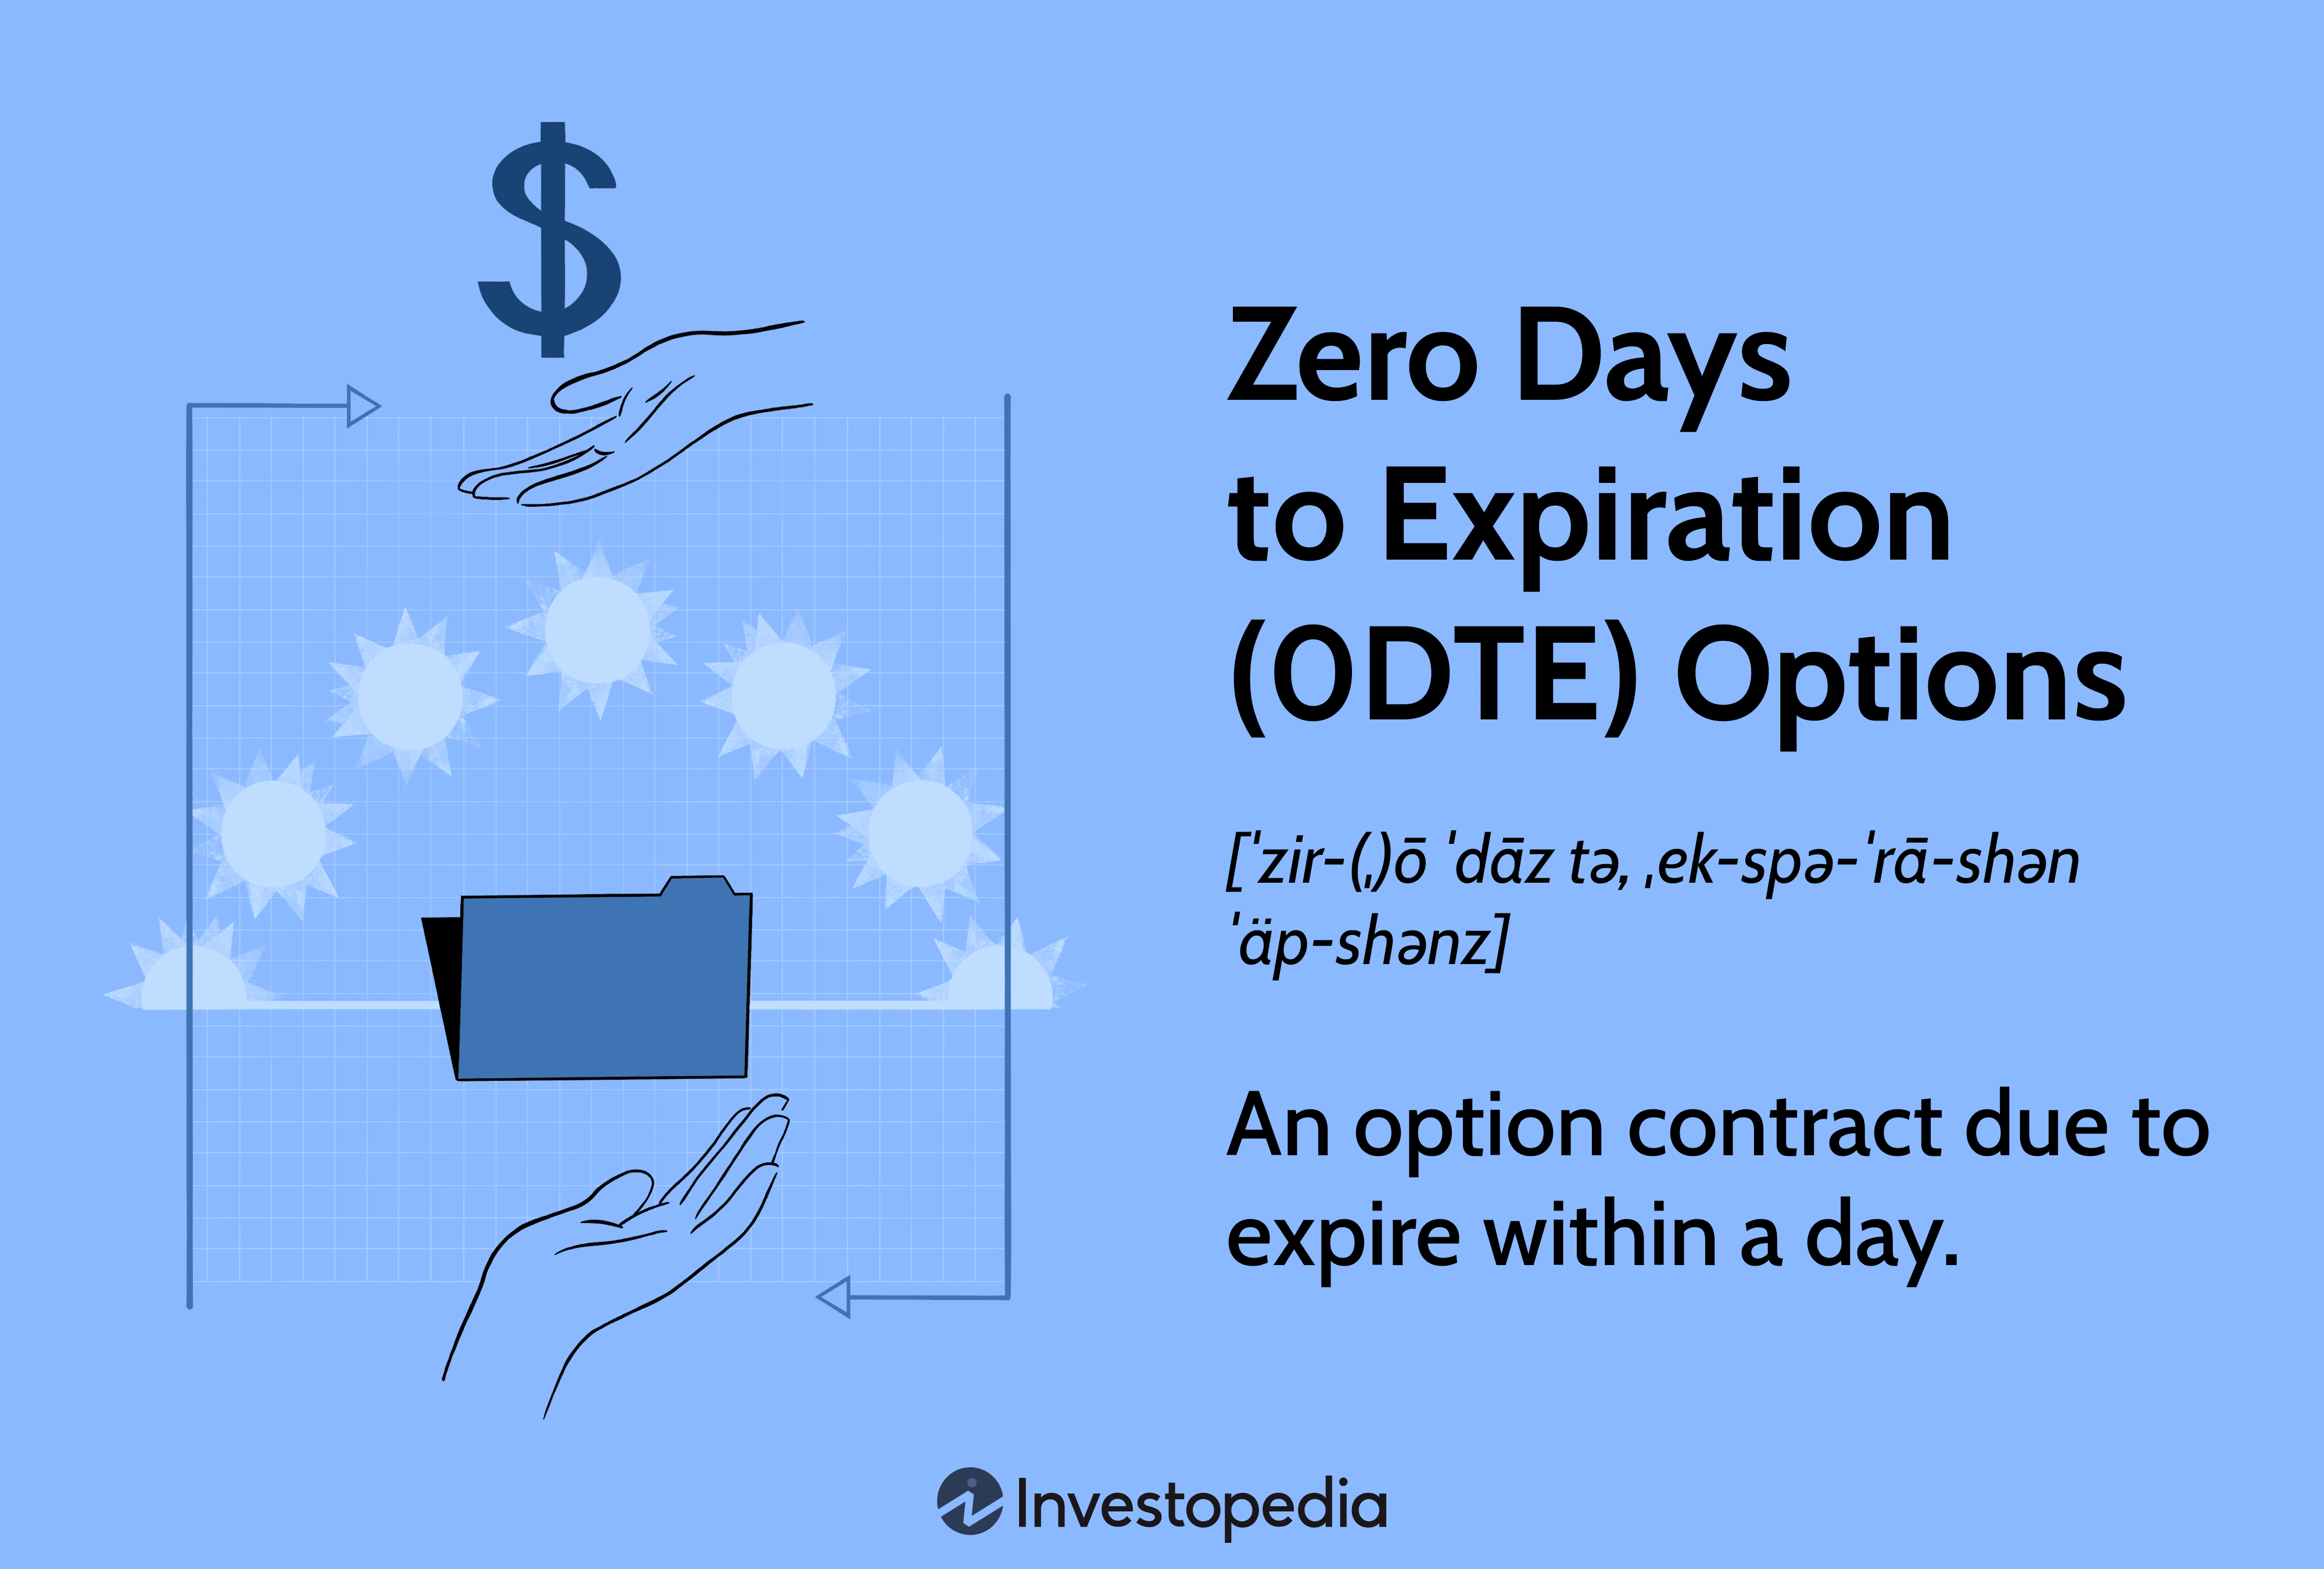 Zero Days to Expiration (0DTE): An option contract due to expire within a day.